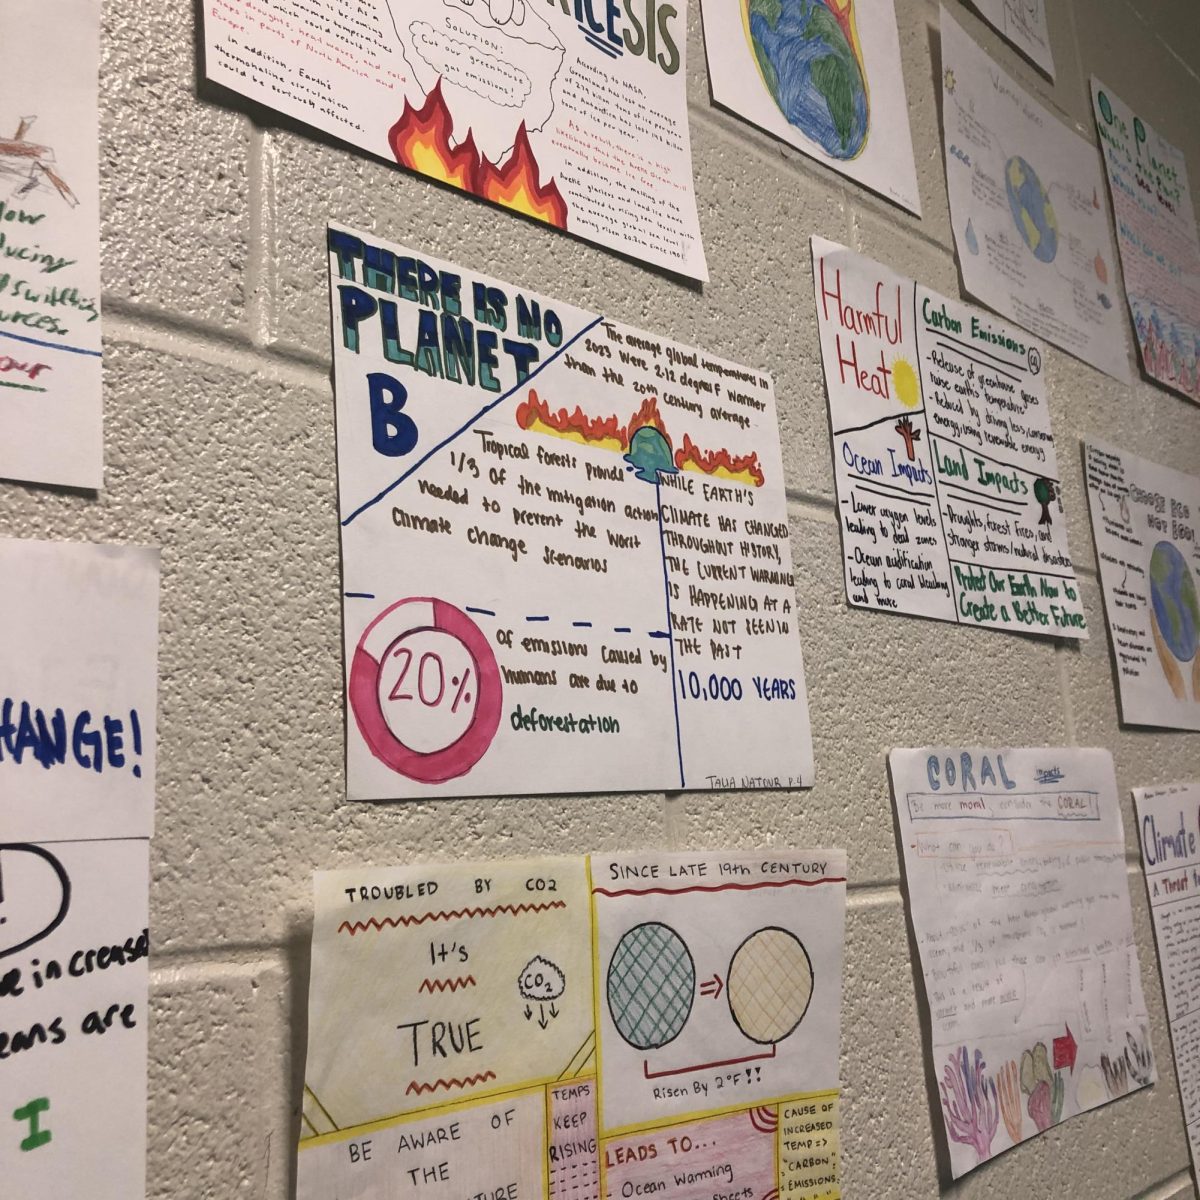 Students in AP Environmental science create posters about climate change as part of a school PSA project.